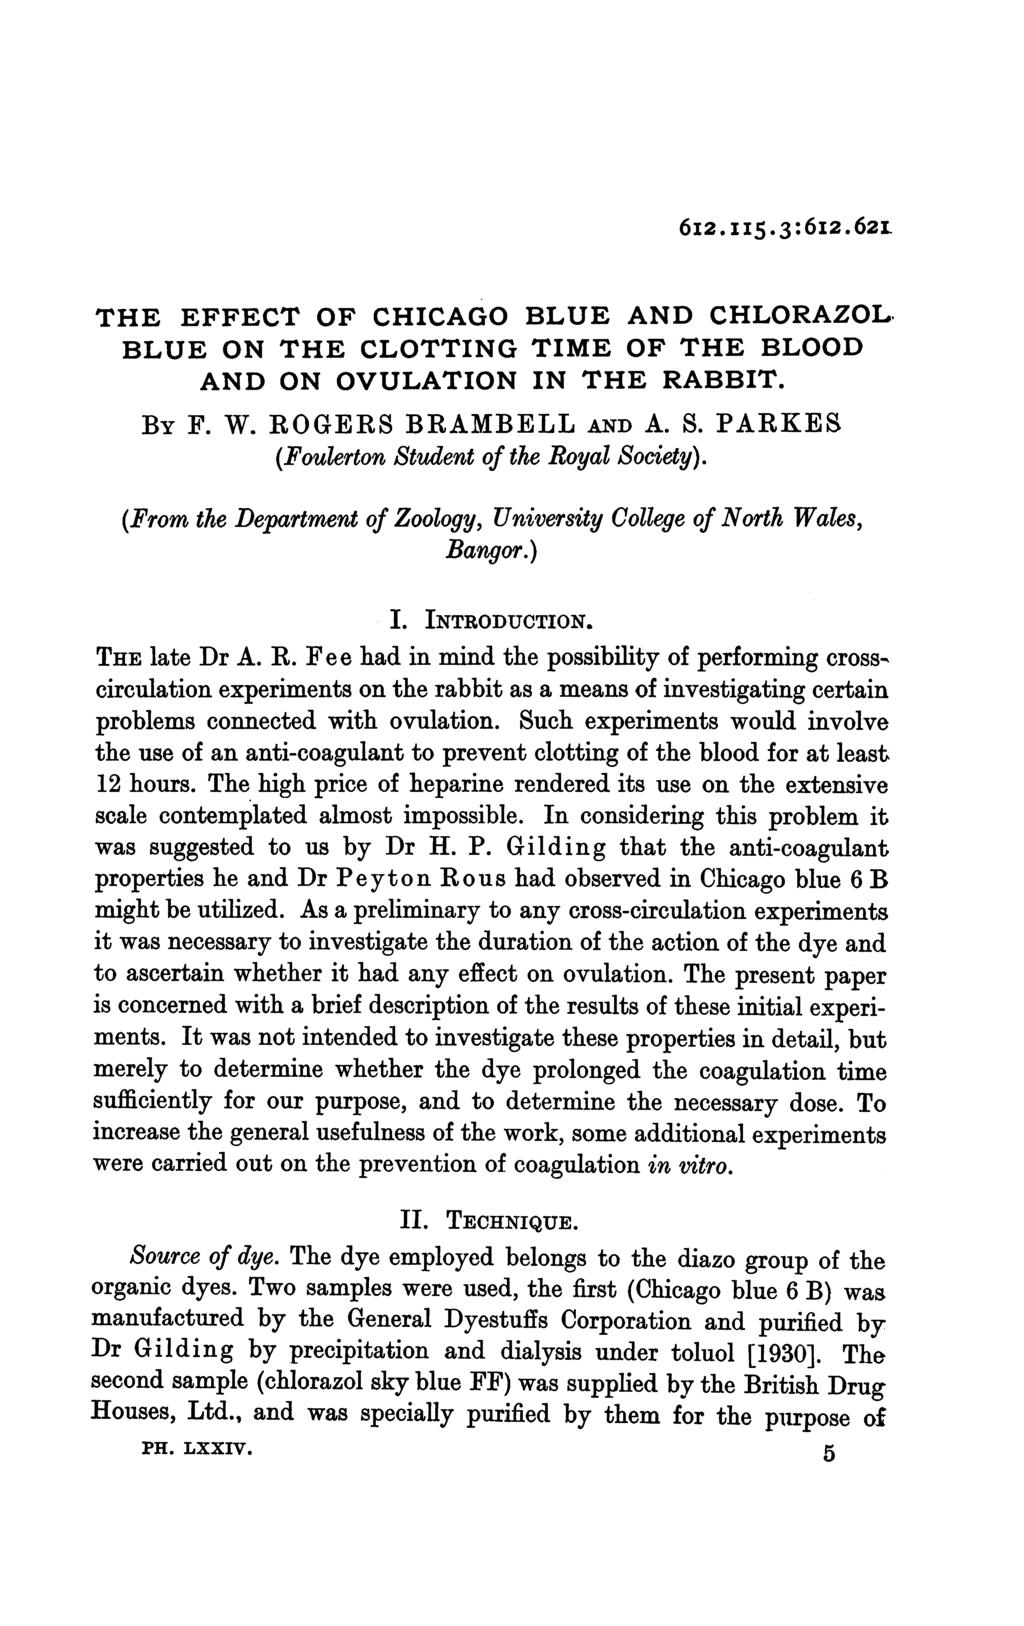 6I2. II5.3:6I2.62L THE EFFECT OF CHICAGO BLUE AND CHLORAZOLI BLUE ON THE CLOTTING TIME OF THE BLOOD AND ON OVULATION IN THE RABBIT. BY F. W. ROGERS BRAMBELL AND A. S.